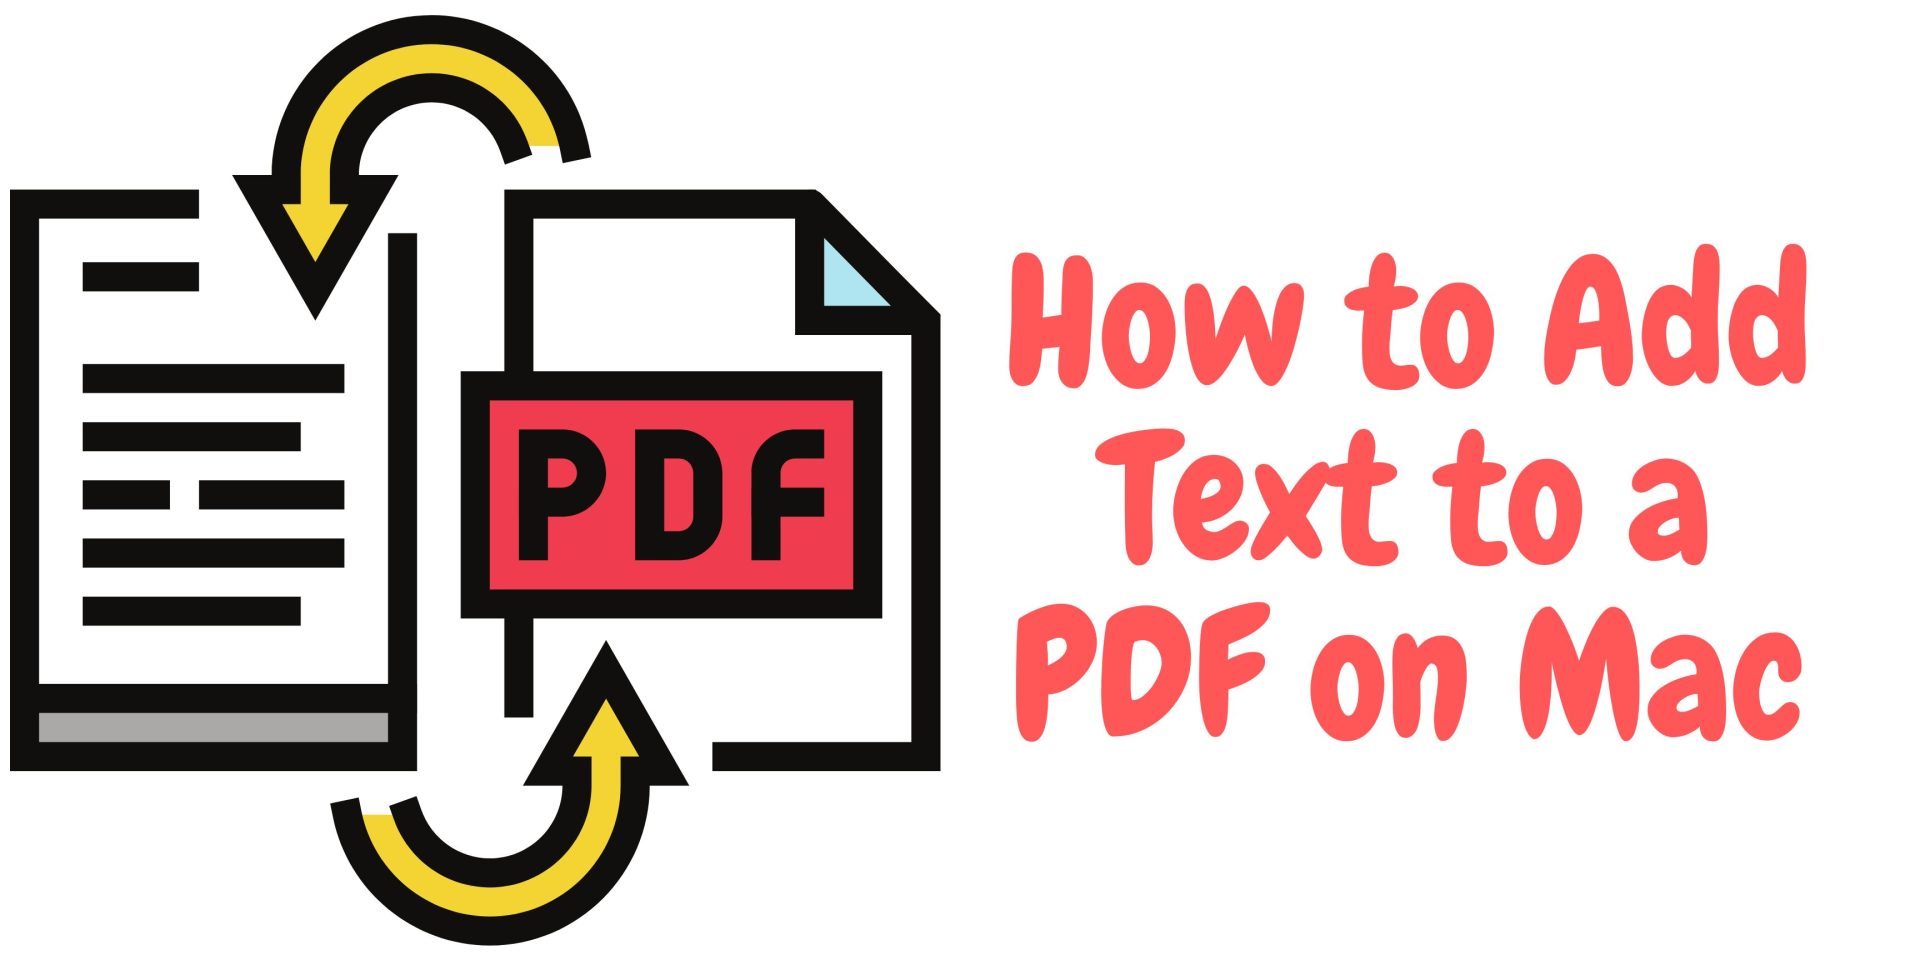 How to Add Text to a PDF on Mac